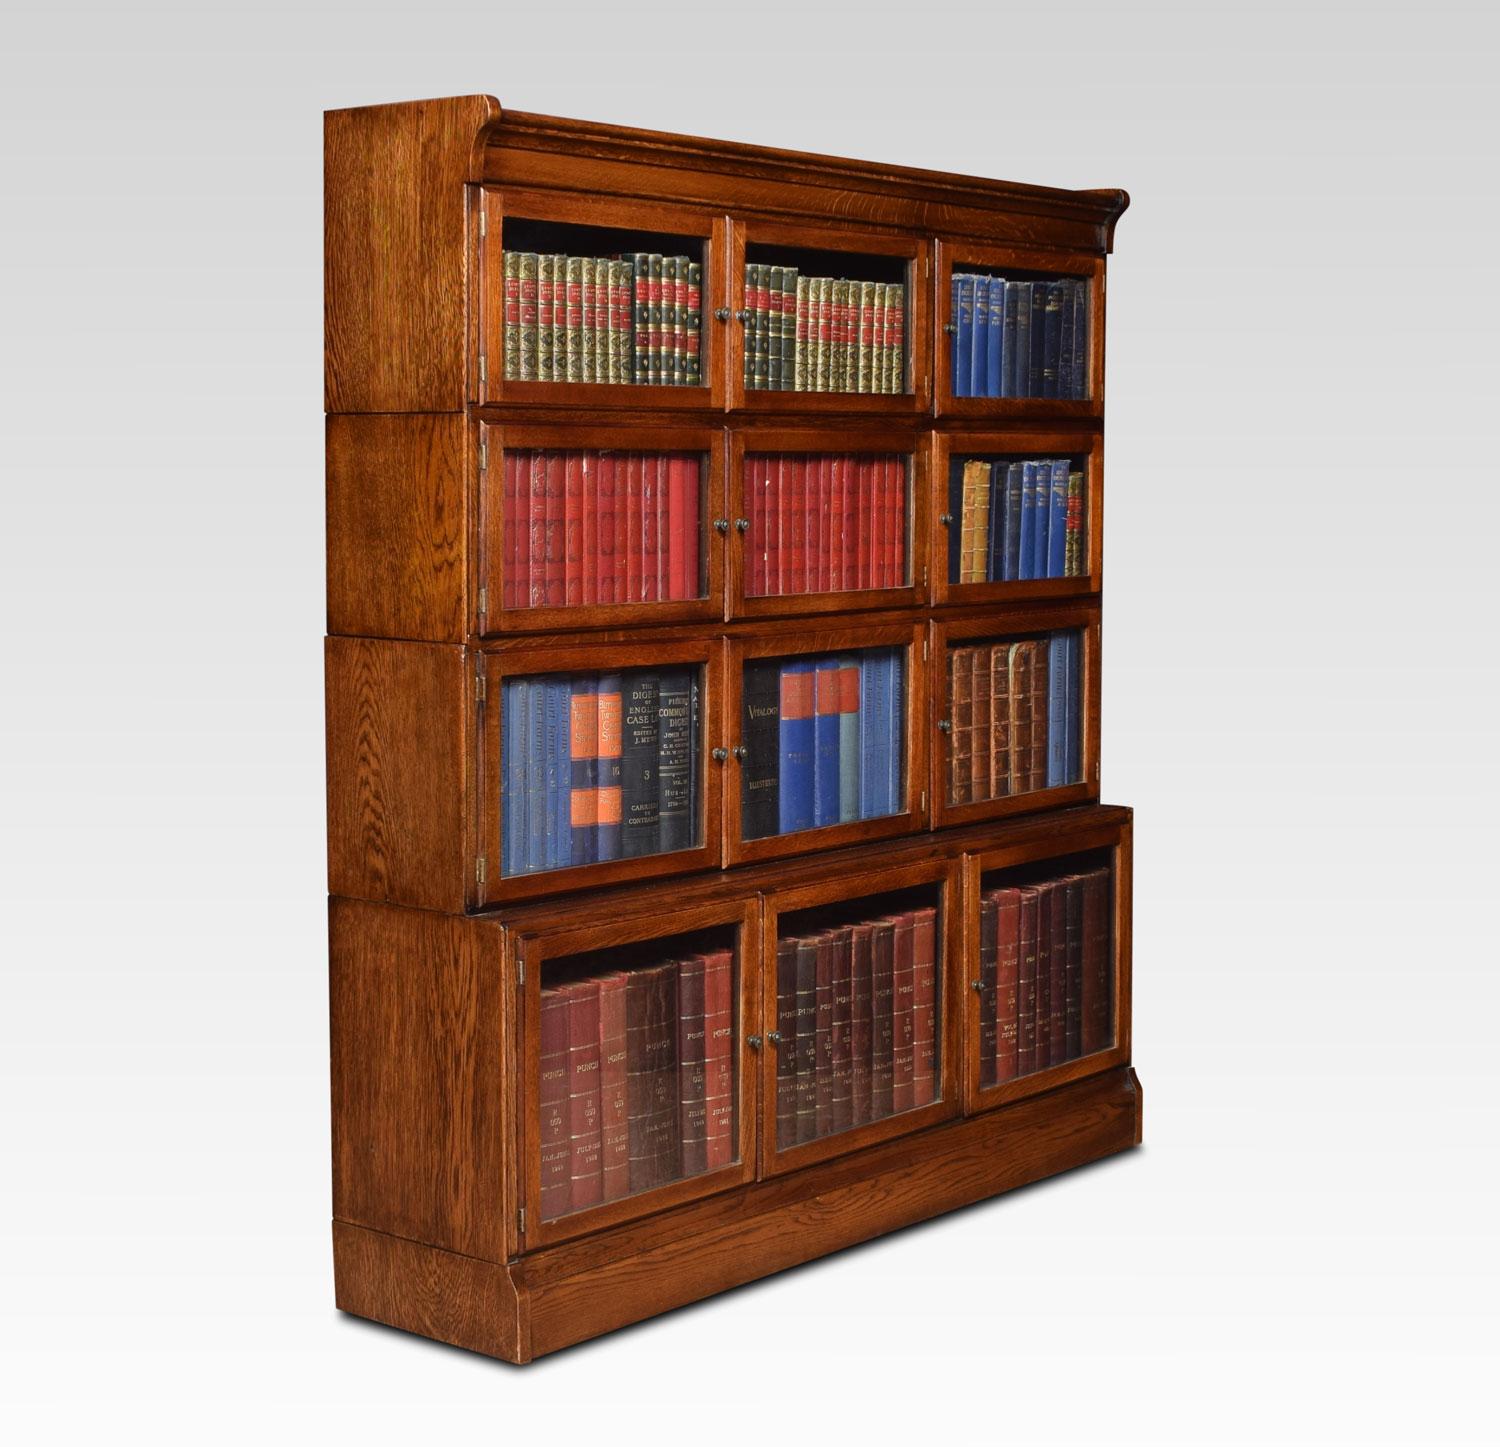 Pair of large oak sectional bookcases, the moulded top above four tiers each tier fitted with three glass doors and having brass knob handles, All raised up on plinth base.
Dimensions:
Height 55.5 inches
Length 52.5 inches
Width 12 inches.